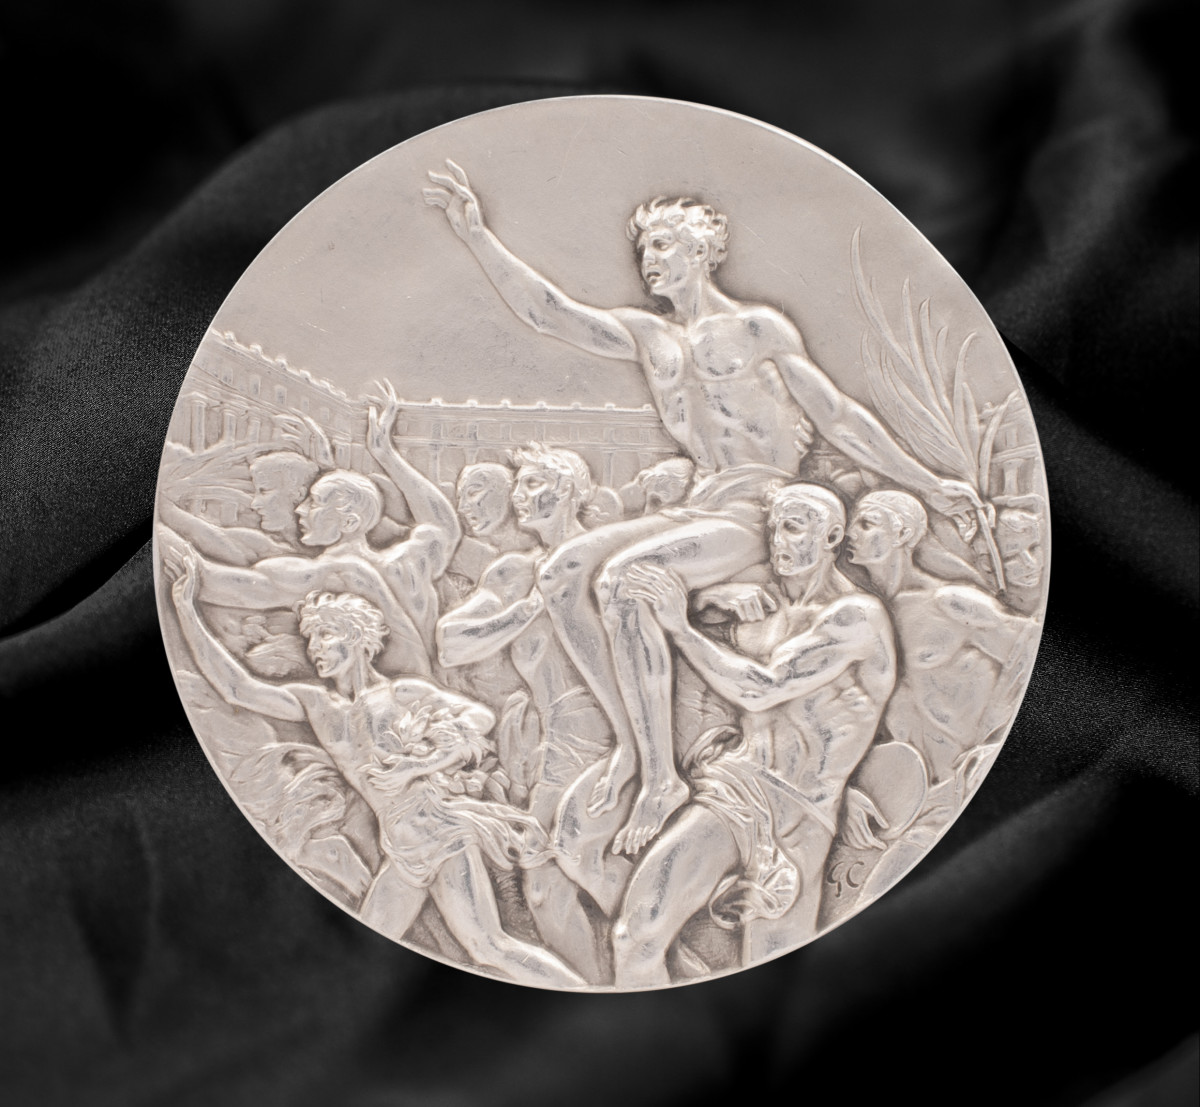 Olympic Silver Medal won by Germany's Carl "Luz" Long during the 1936 Berlin Games.